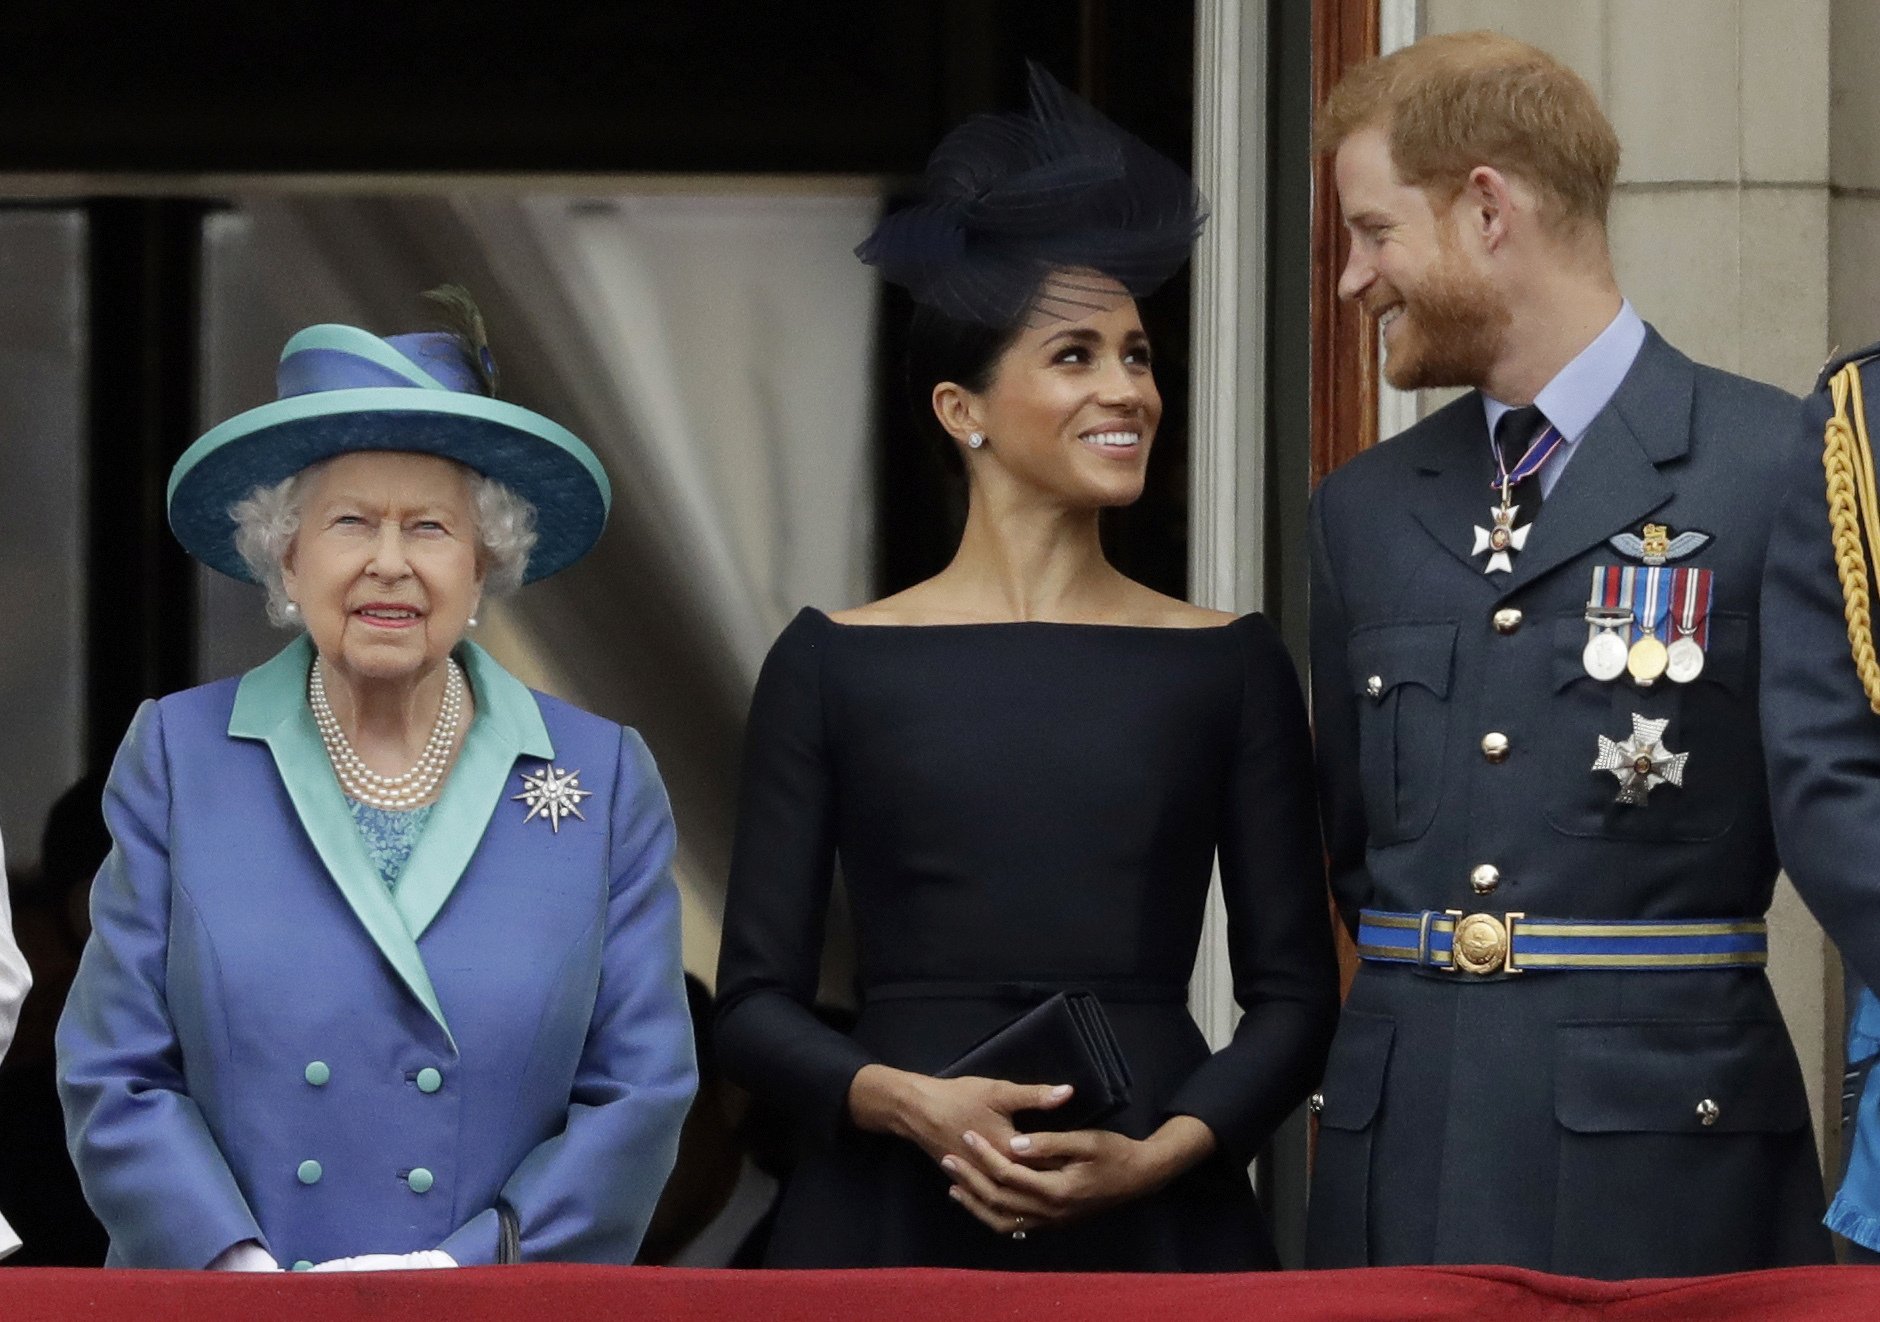 Meghan will stay in the US as she is heavily pregnant, the Palace confirmed